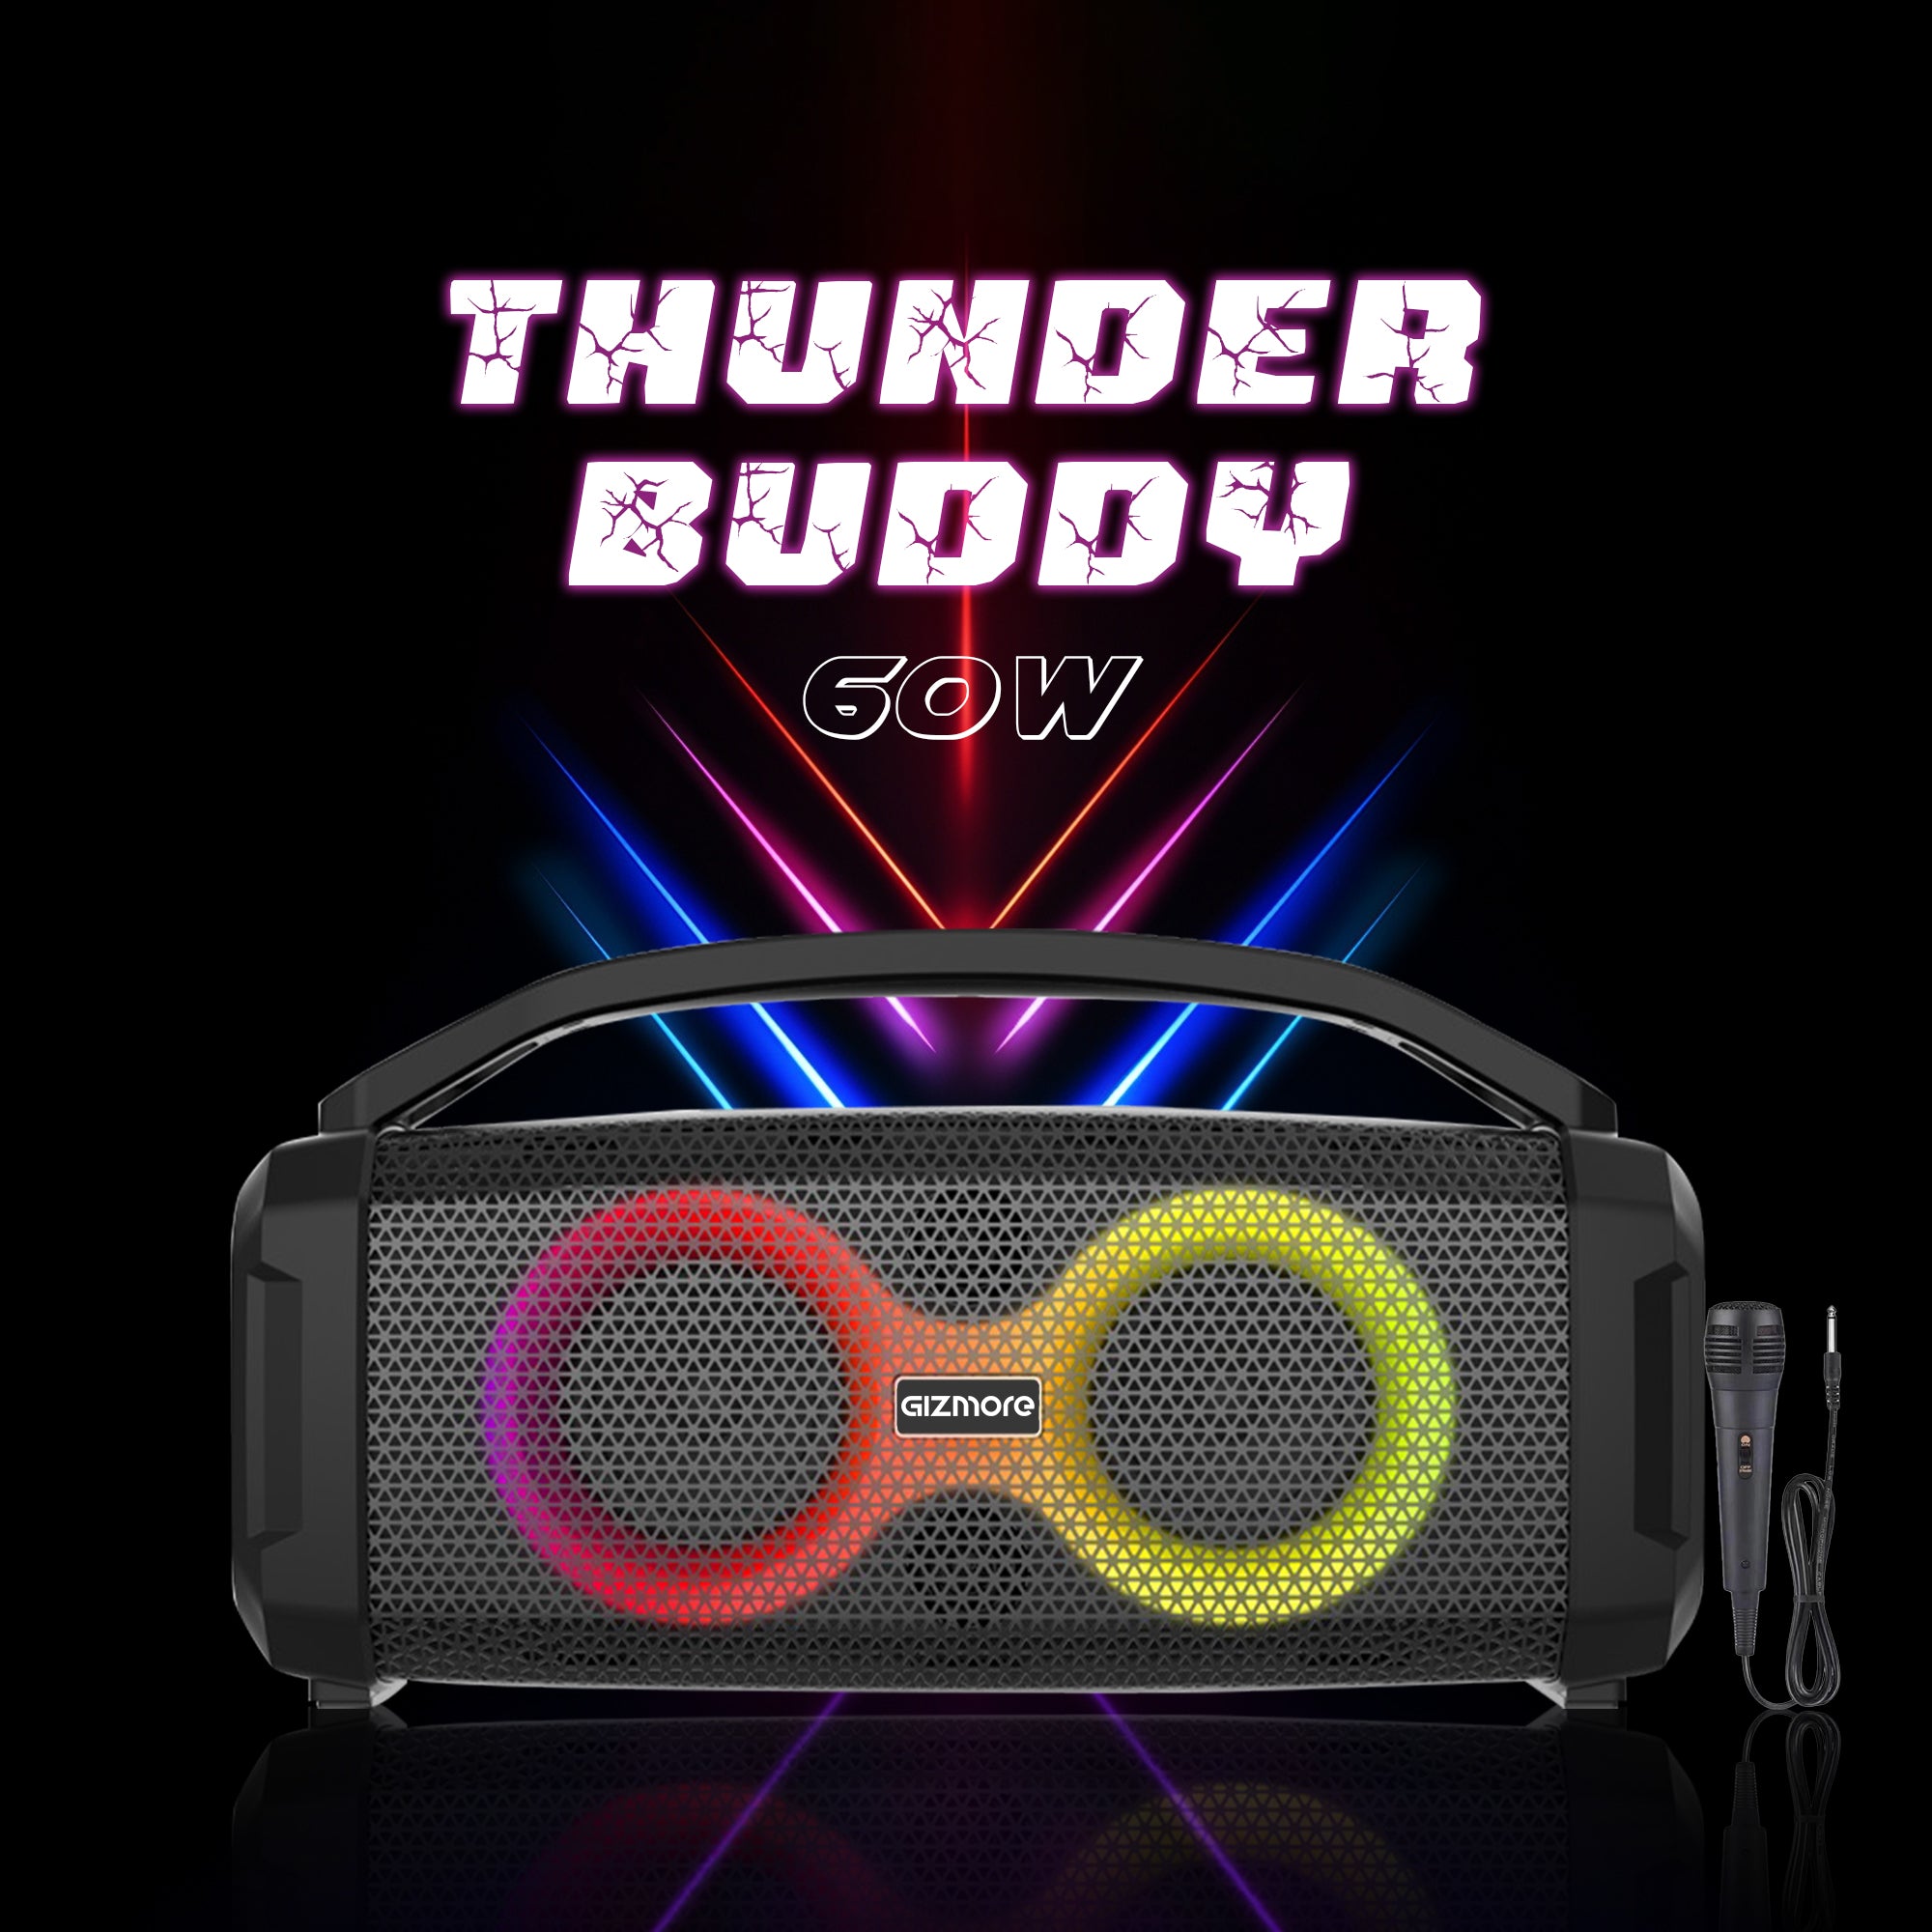 GIZMORE THUNDER BUDDY 60 W Bluetooth Portable Party Speaker with High Bass Up to 10 hrs Playtime with Type C Charging, 13 Modes of RGB Lights, Multi Connectivity BT, USB, AUX, TF Card and Wired MIC